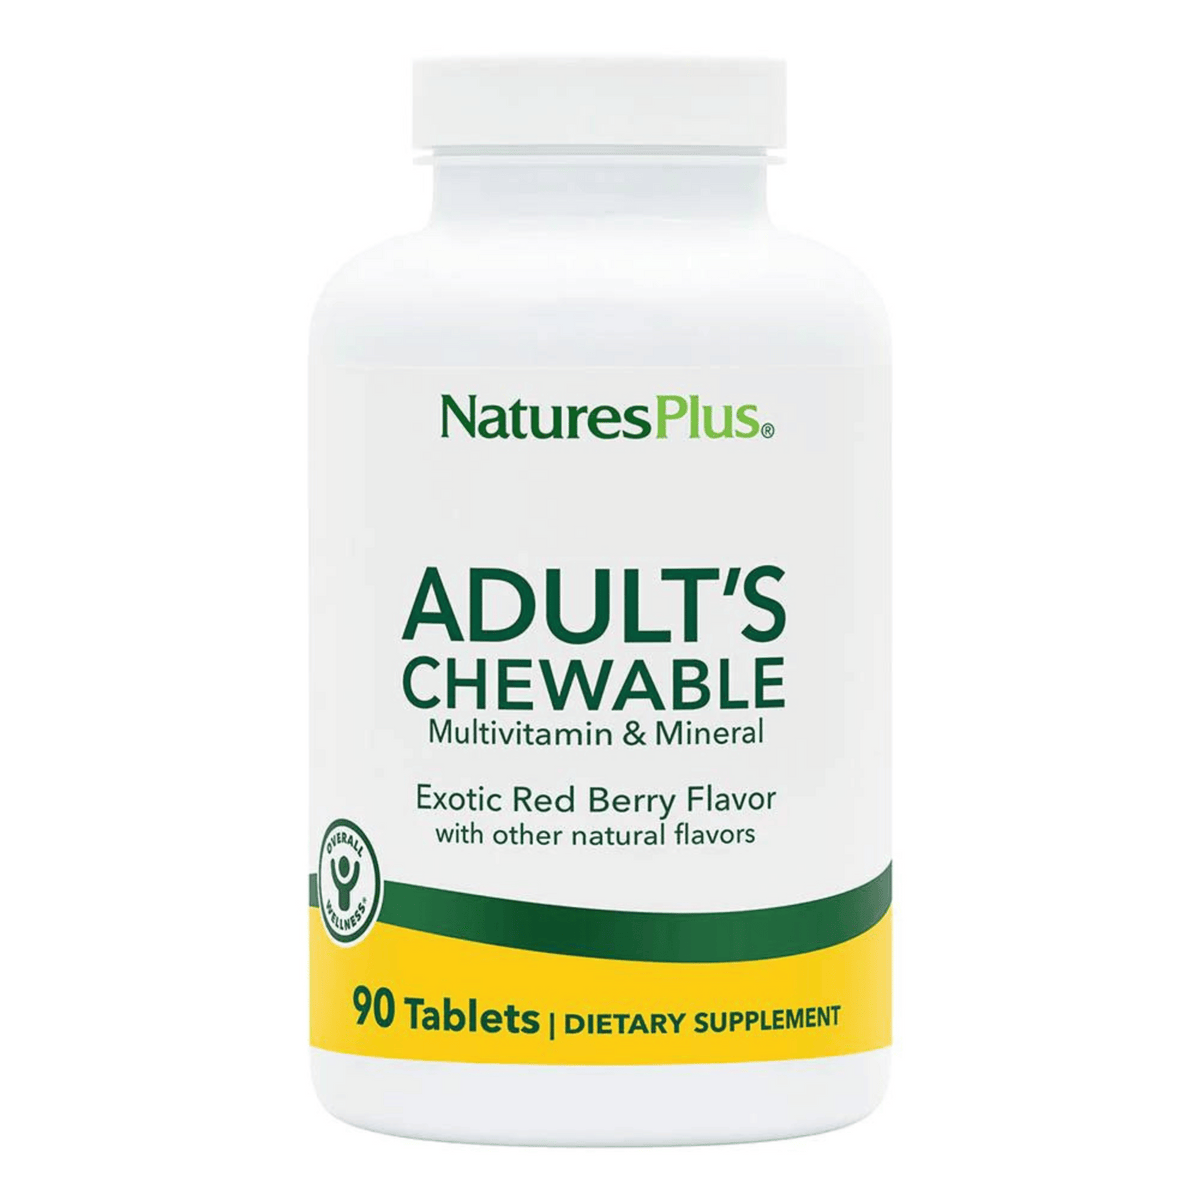 Primary Image of Adult's Multi-Vitamin Chewable Exotic Red Super Fruits